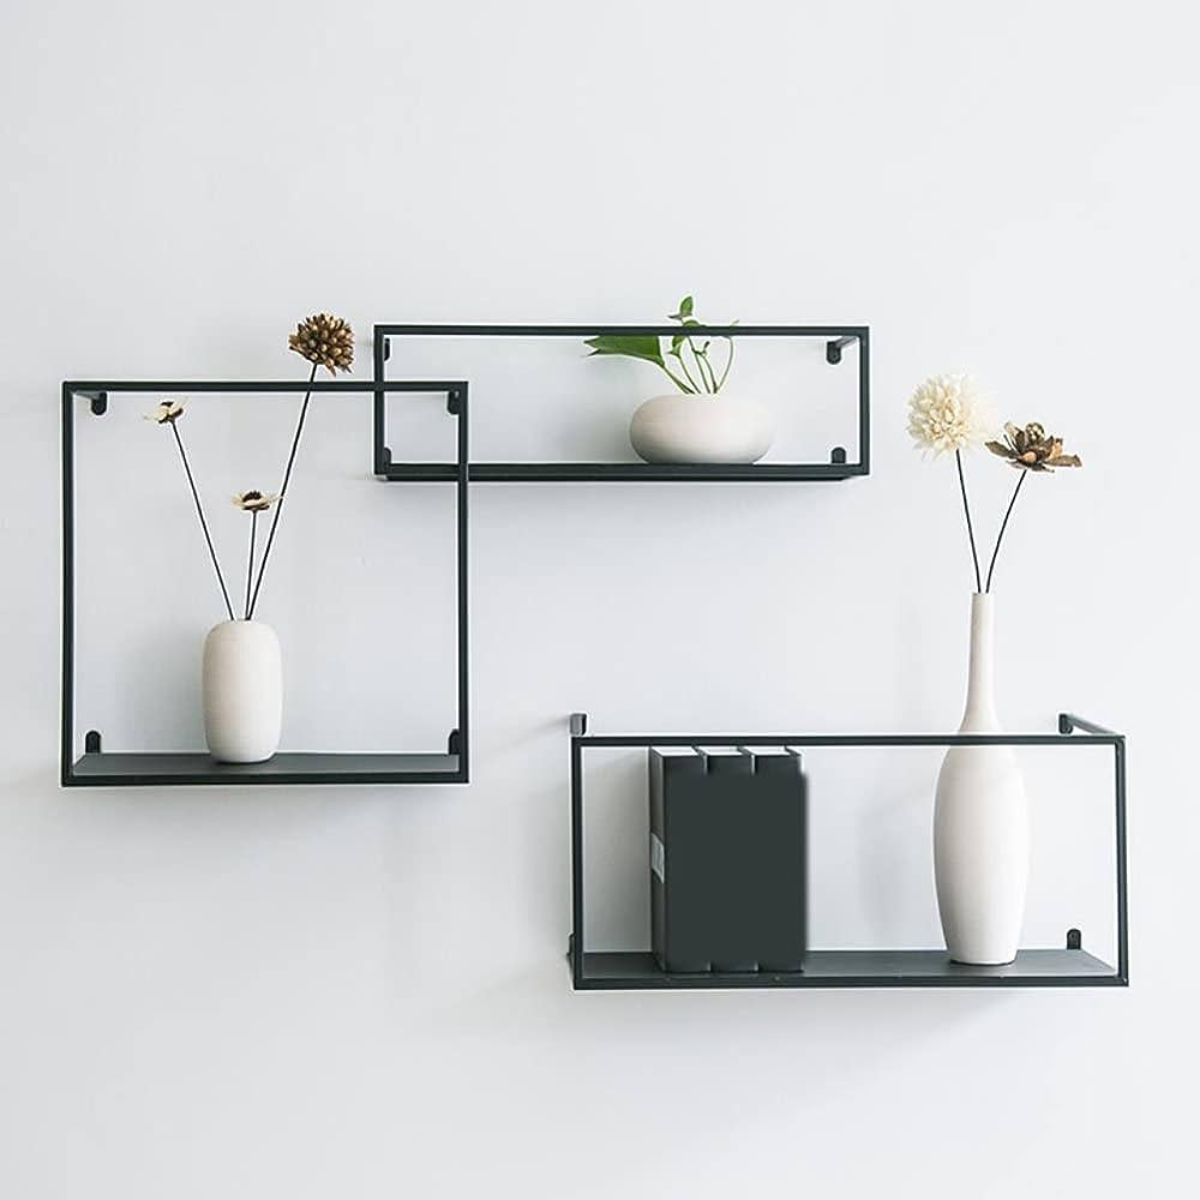 2. Surprise Her with Iron-Coated Wall Shelves: A Unique and Thoughtful 6 Year Anniversary Gift